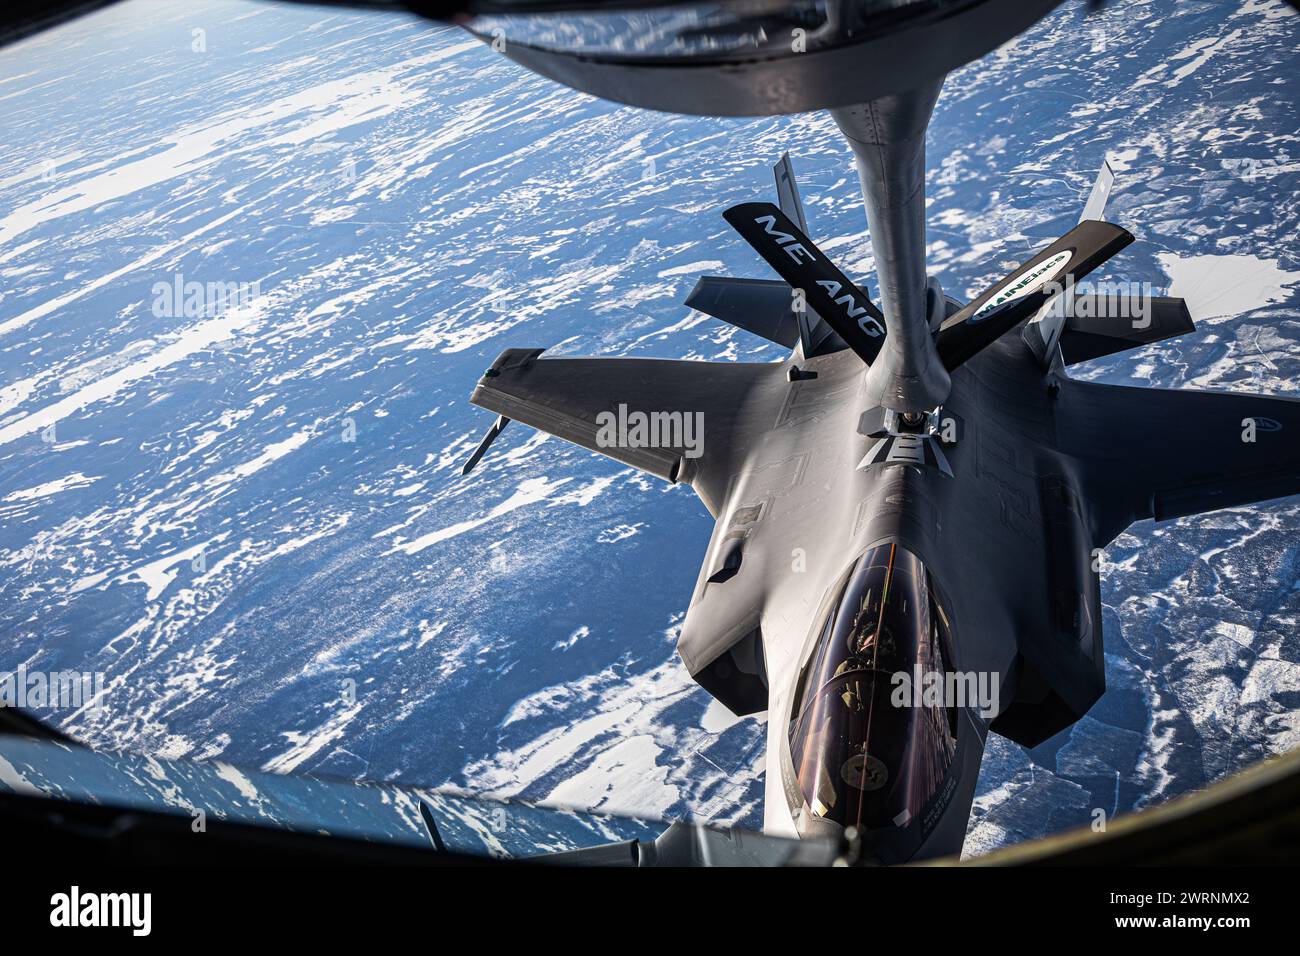 Swedish Airspace, Sweden. 11 March, 2024. A Norwegian Royal Air Force F-35 Lightning II stealth fighter aircraft, refuels from an U.S Air Force KC-135 Stratotanker during exercise Nordic Response 24, March 11, 2024 over Sweden. Nordic Response is a yearly multinational exercise led by Norway.  Credit: MSgt. Andrew Sinclair/U.S. Air Force/Alamy Live News Credit: MSgt. Andrew Sinclair/U.S. Air Force/Alamy Live News Stock Photo